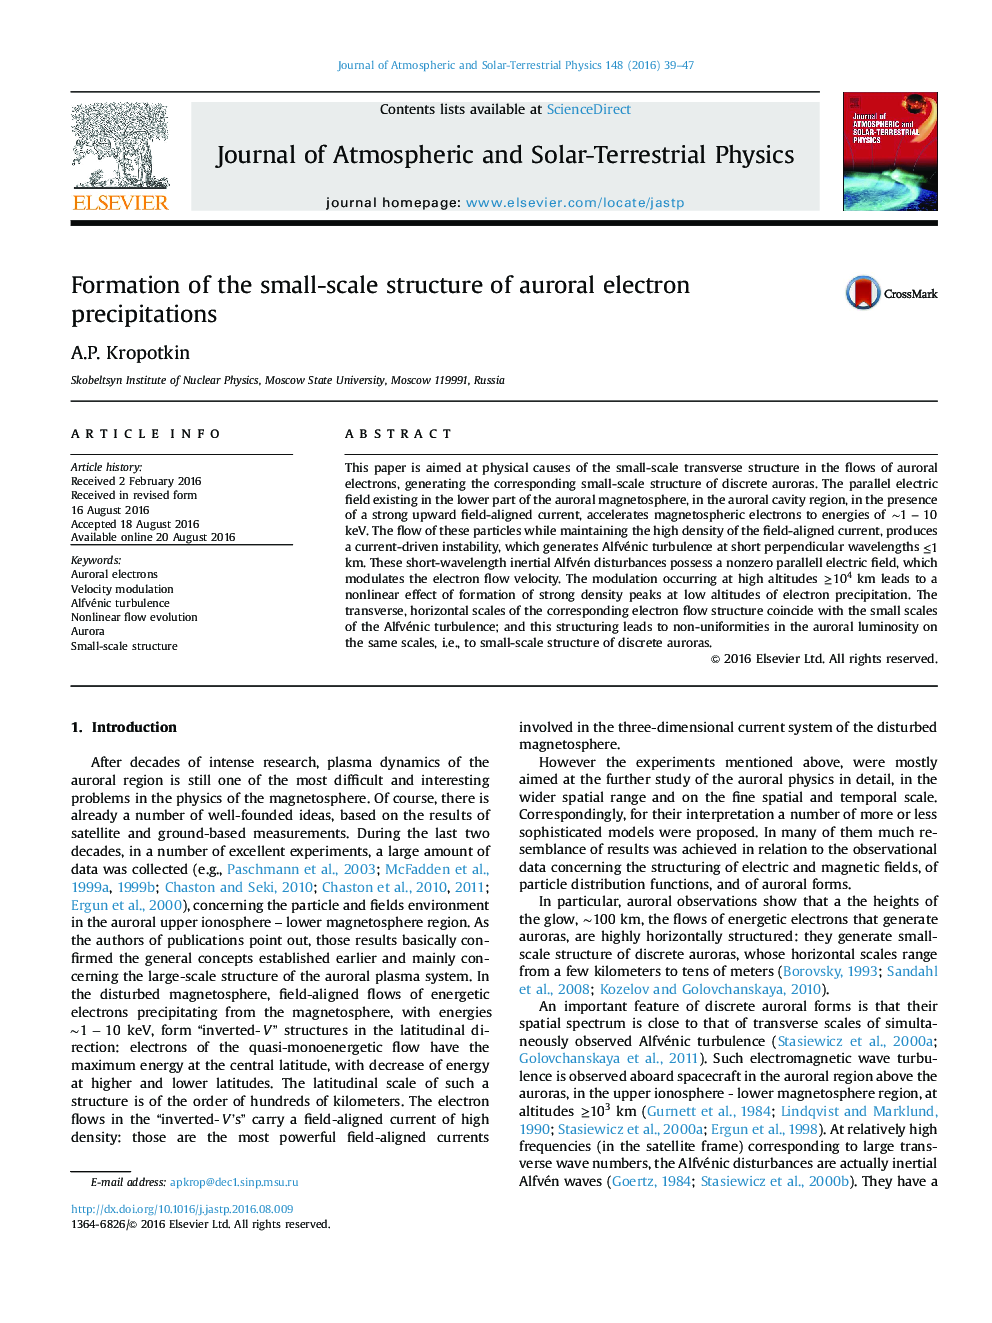 Formation of the small-scale structure of auroral electron precipitations